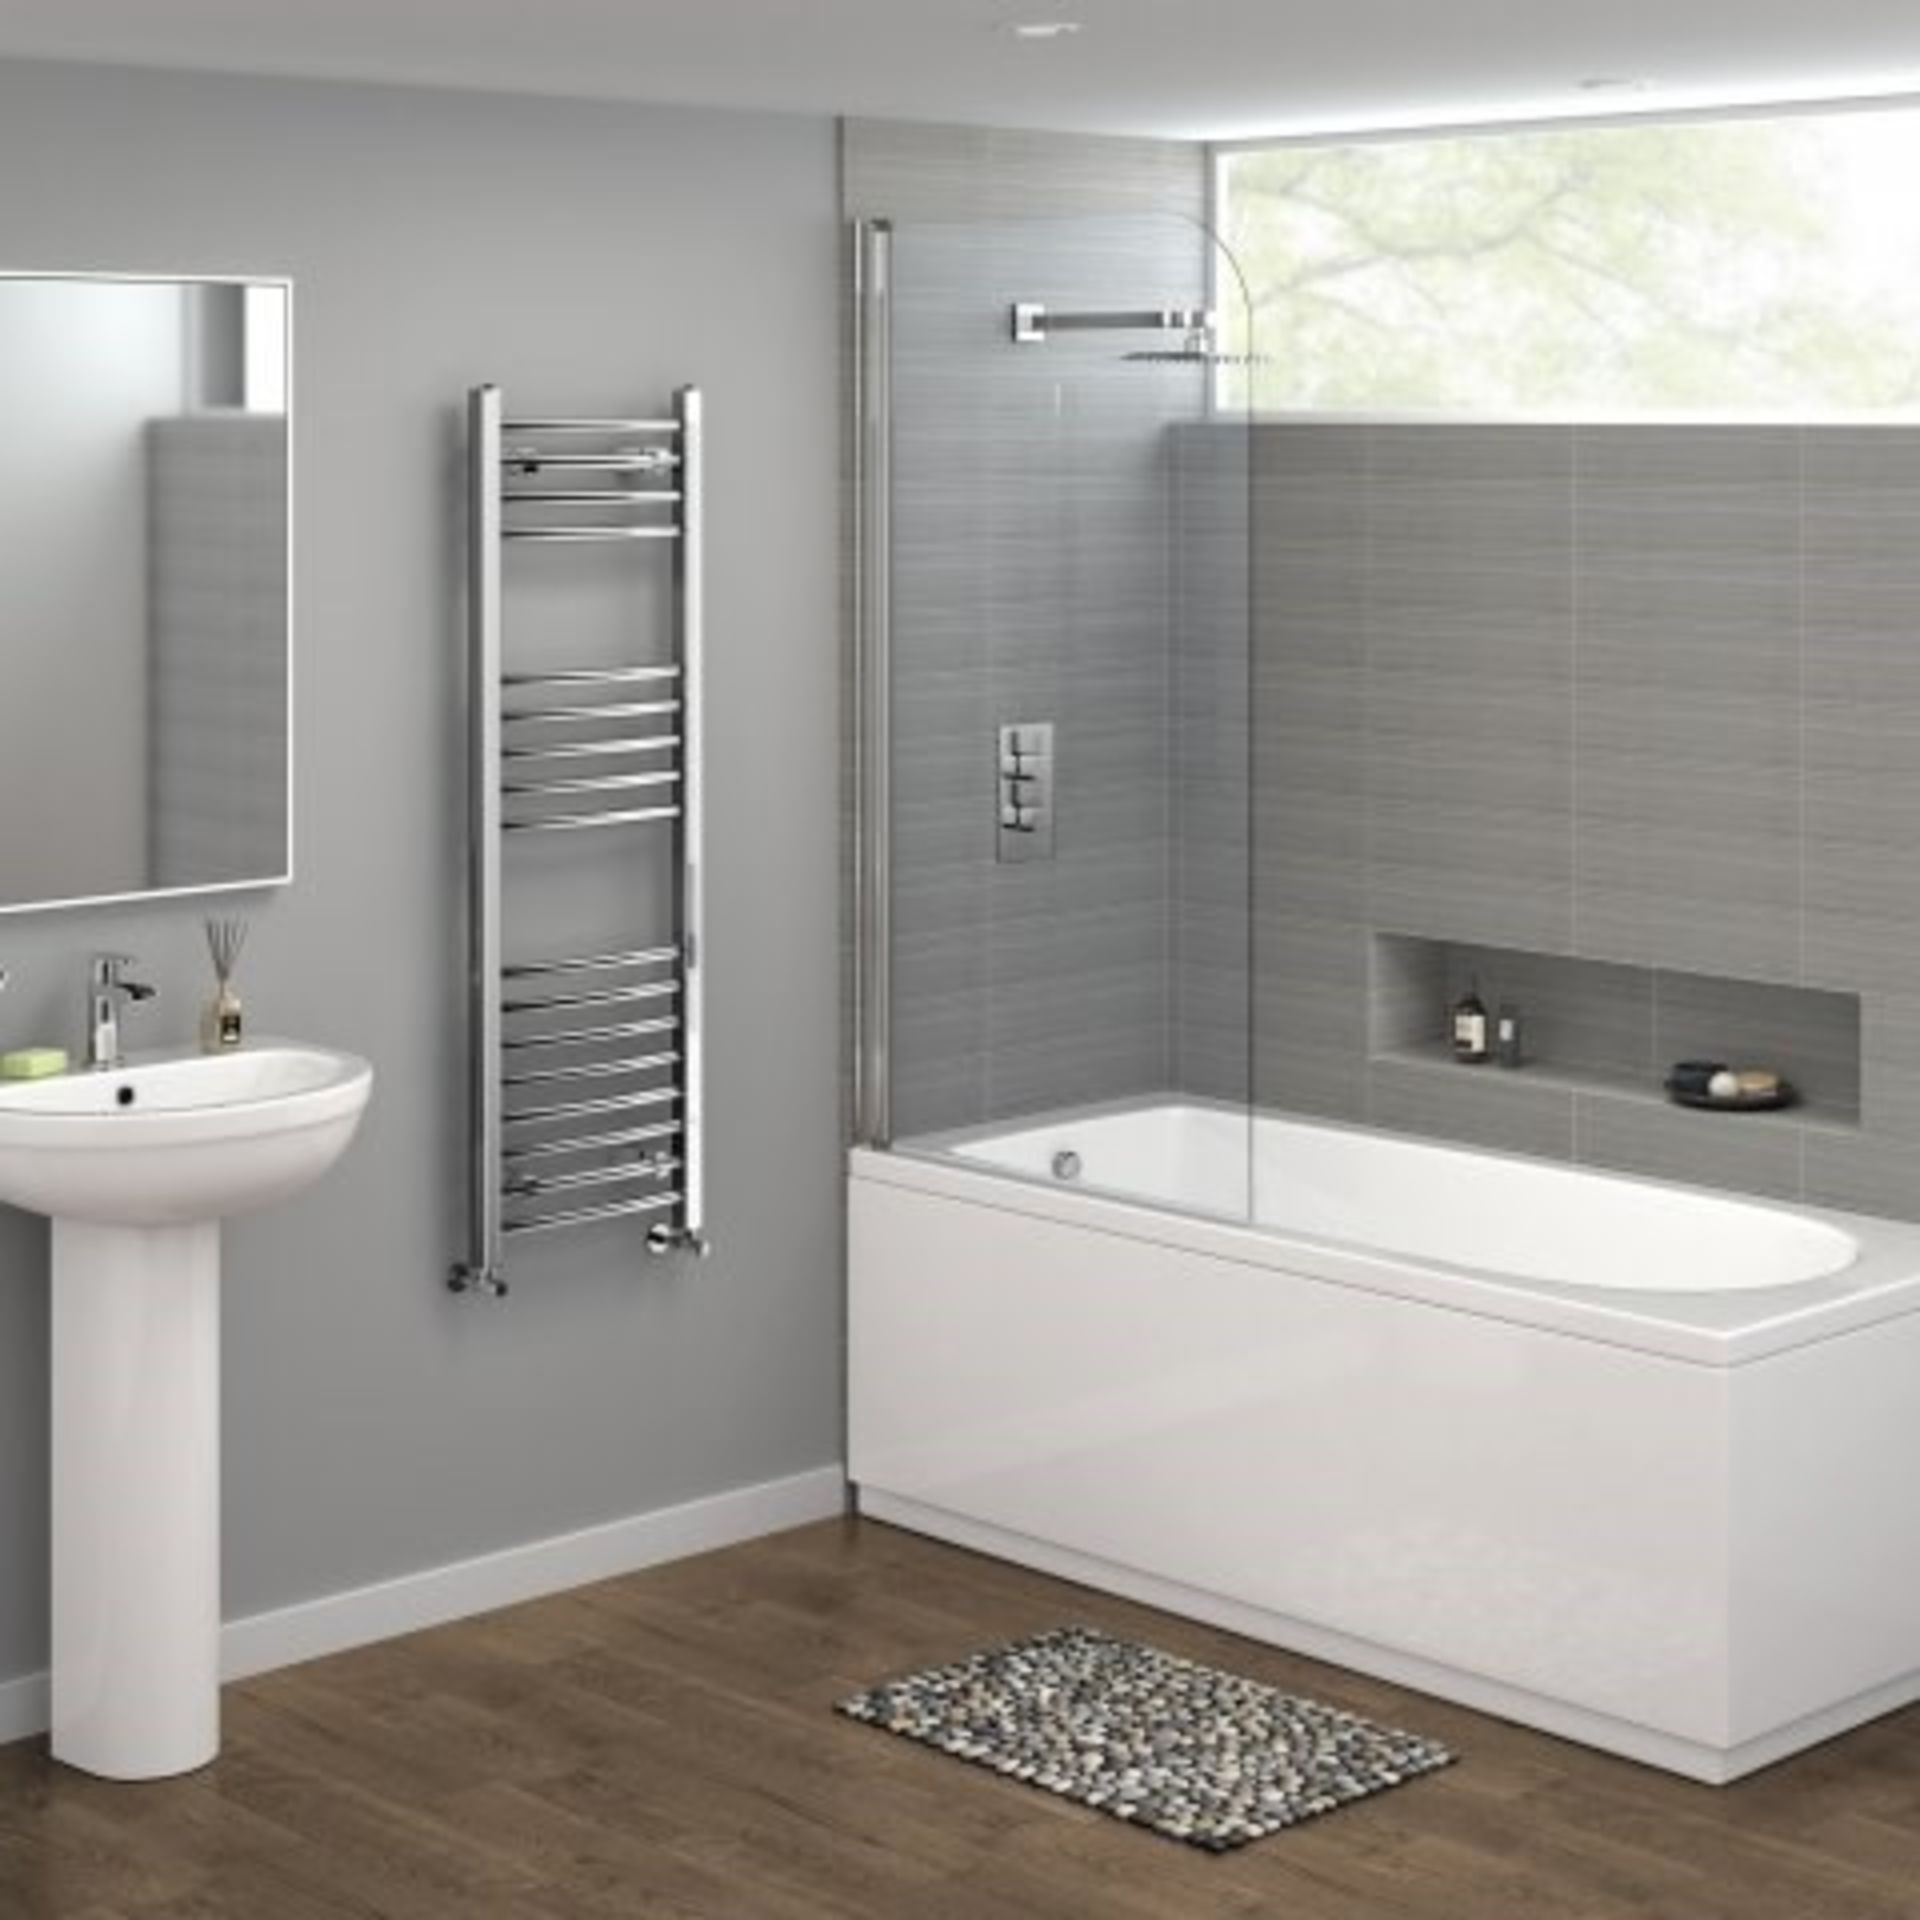 1200x400mm - 20mm Tubes - Chrome Curved Rail Ladder Towel Radiator. NC1200400. Our Nancy 1200x... - Image 2 of 3